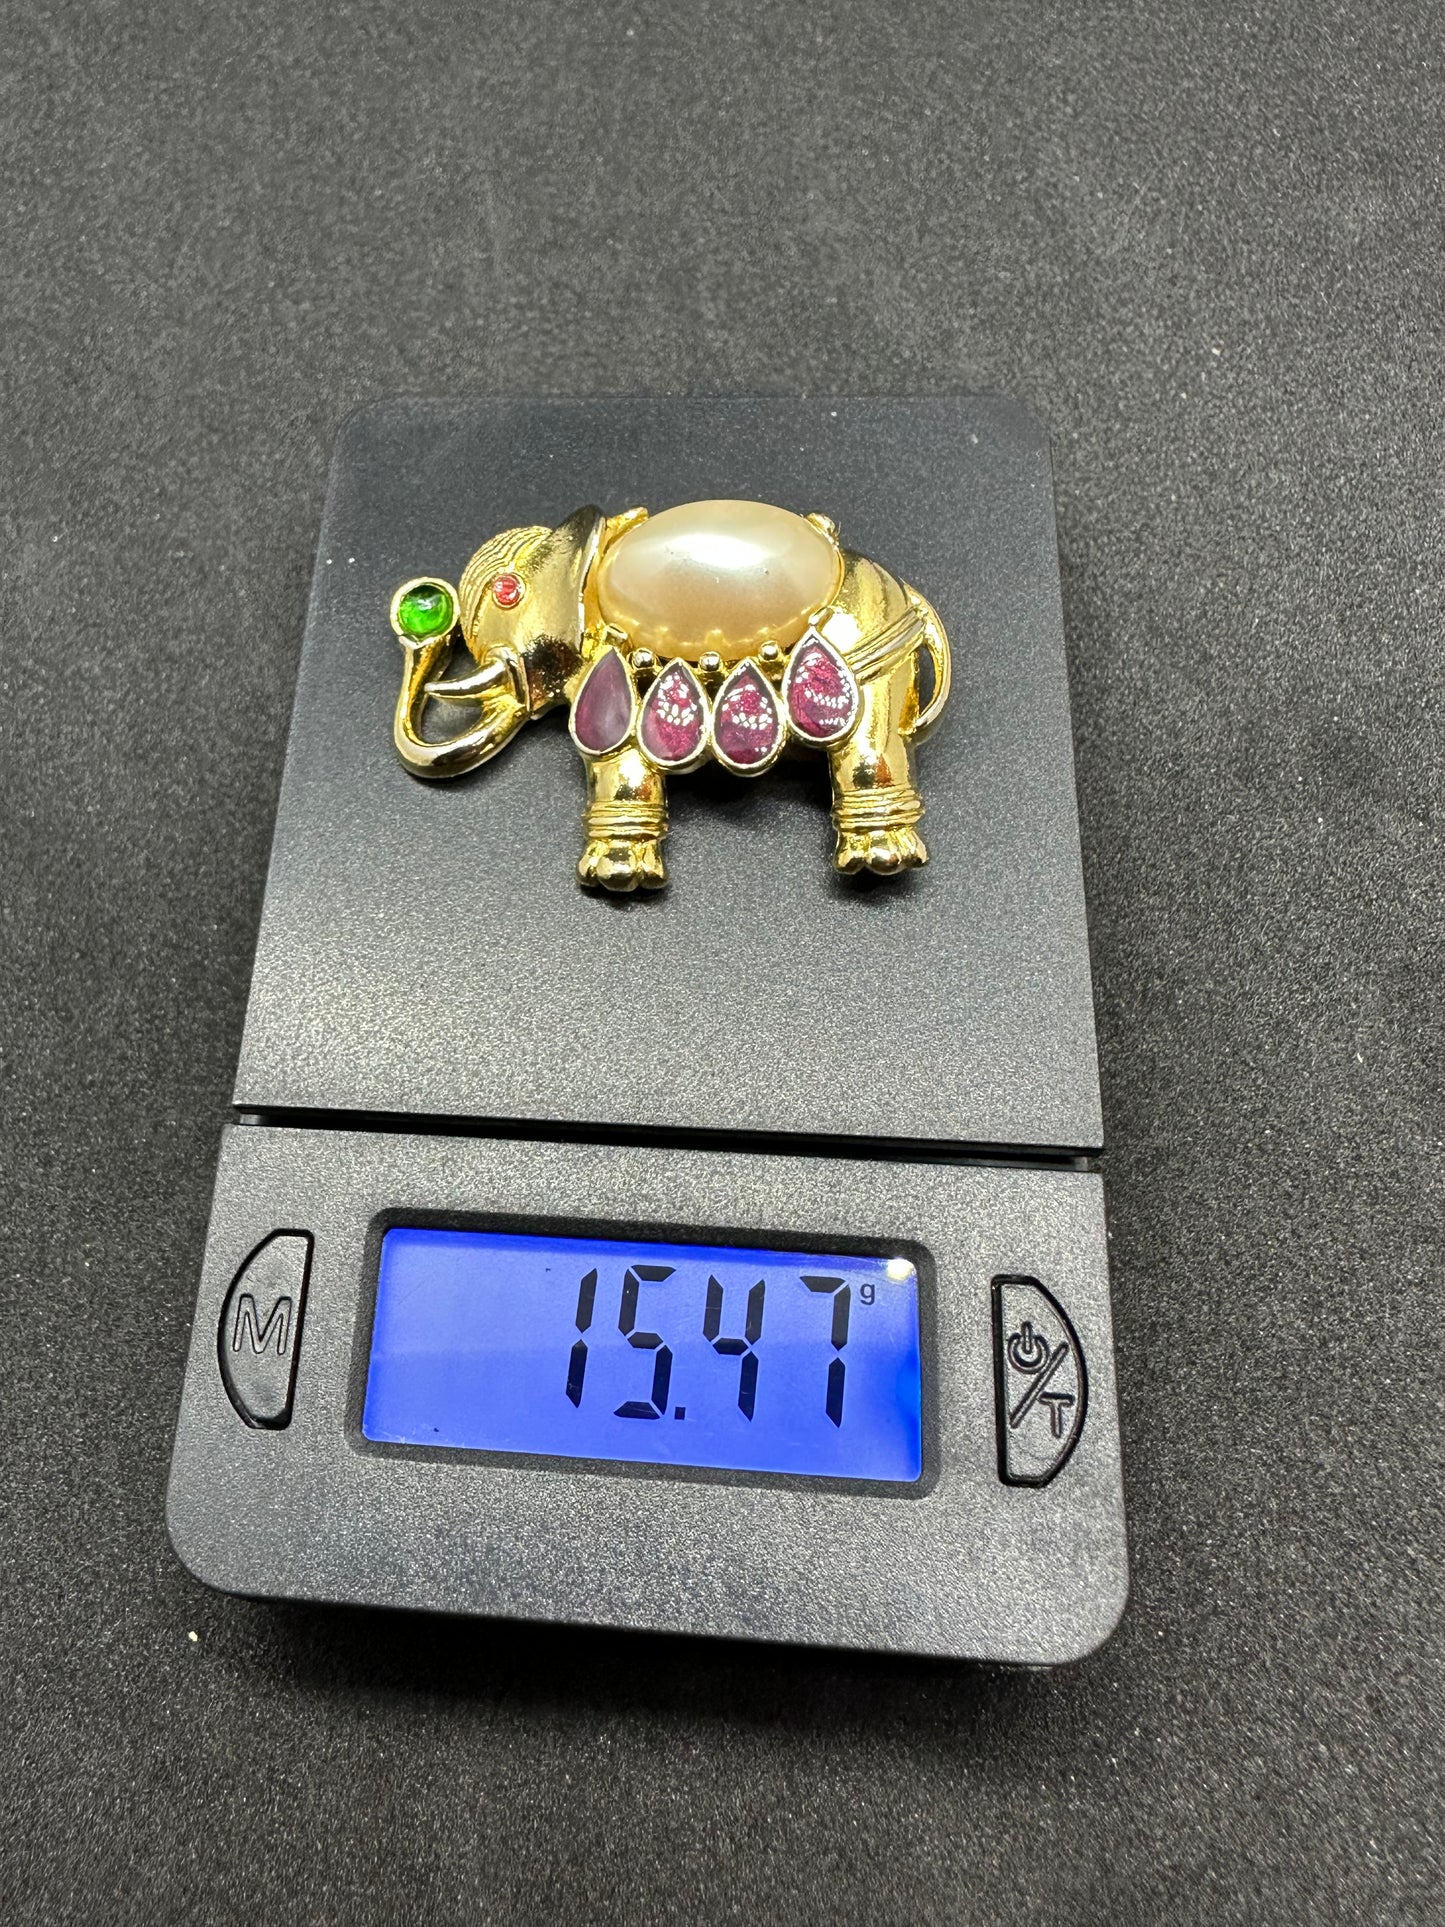 Vintage TRIFARI Gold Colored Moghul Elephant Brooch Pin Signed